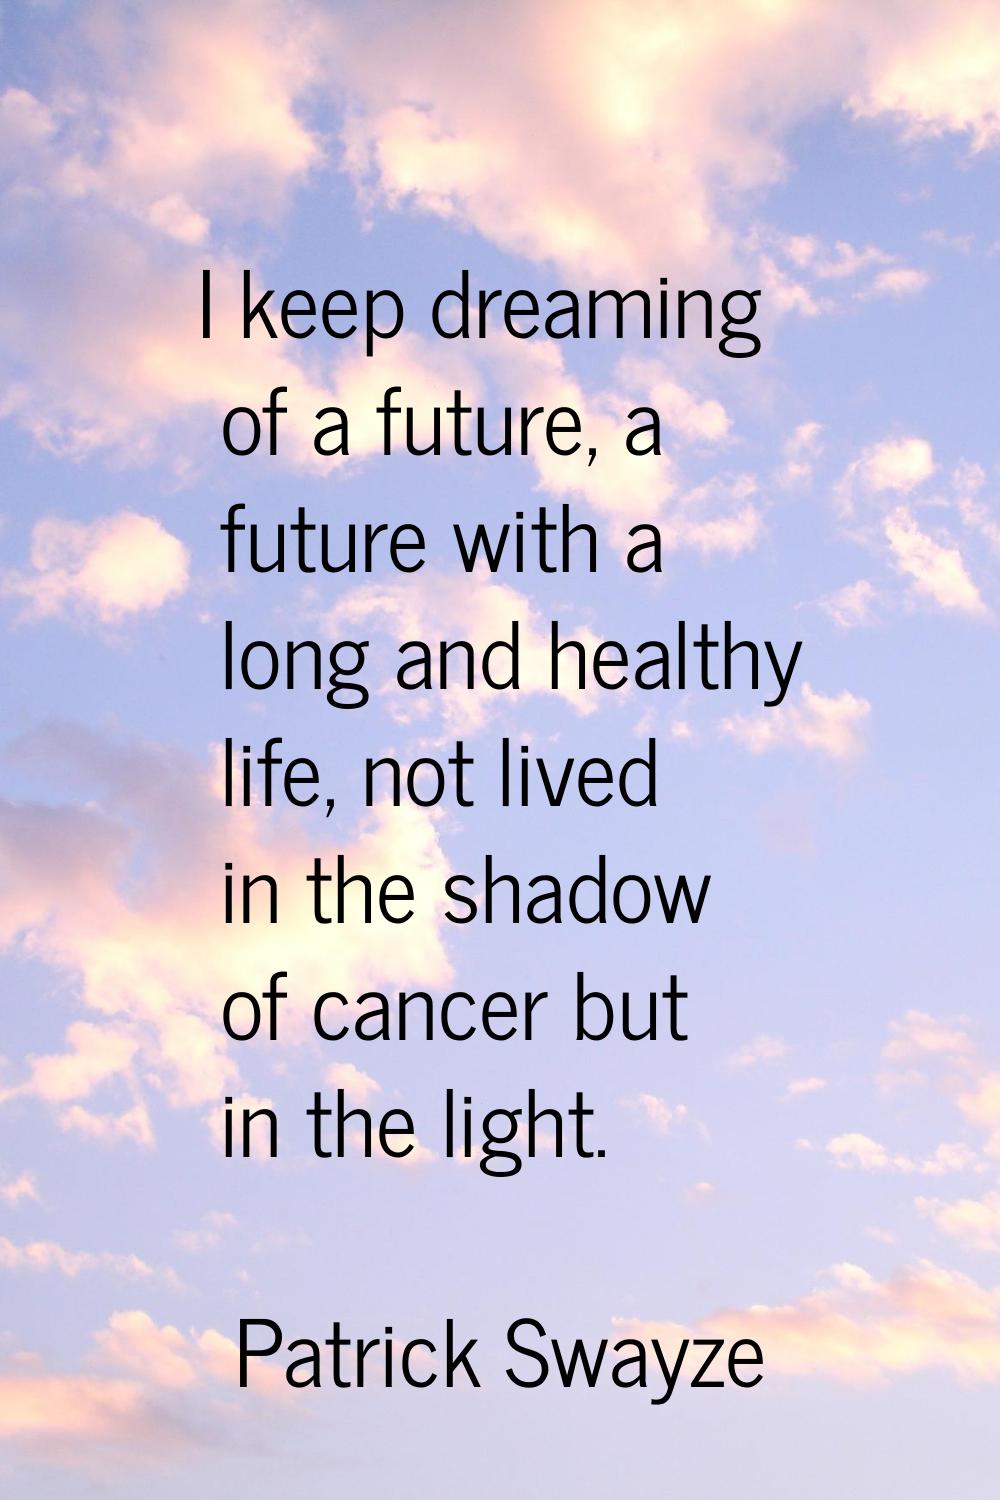 I keep dreaming of a future, a future with a long and healthy life, not lived in the shadow of canc